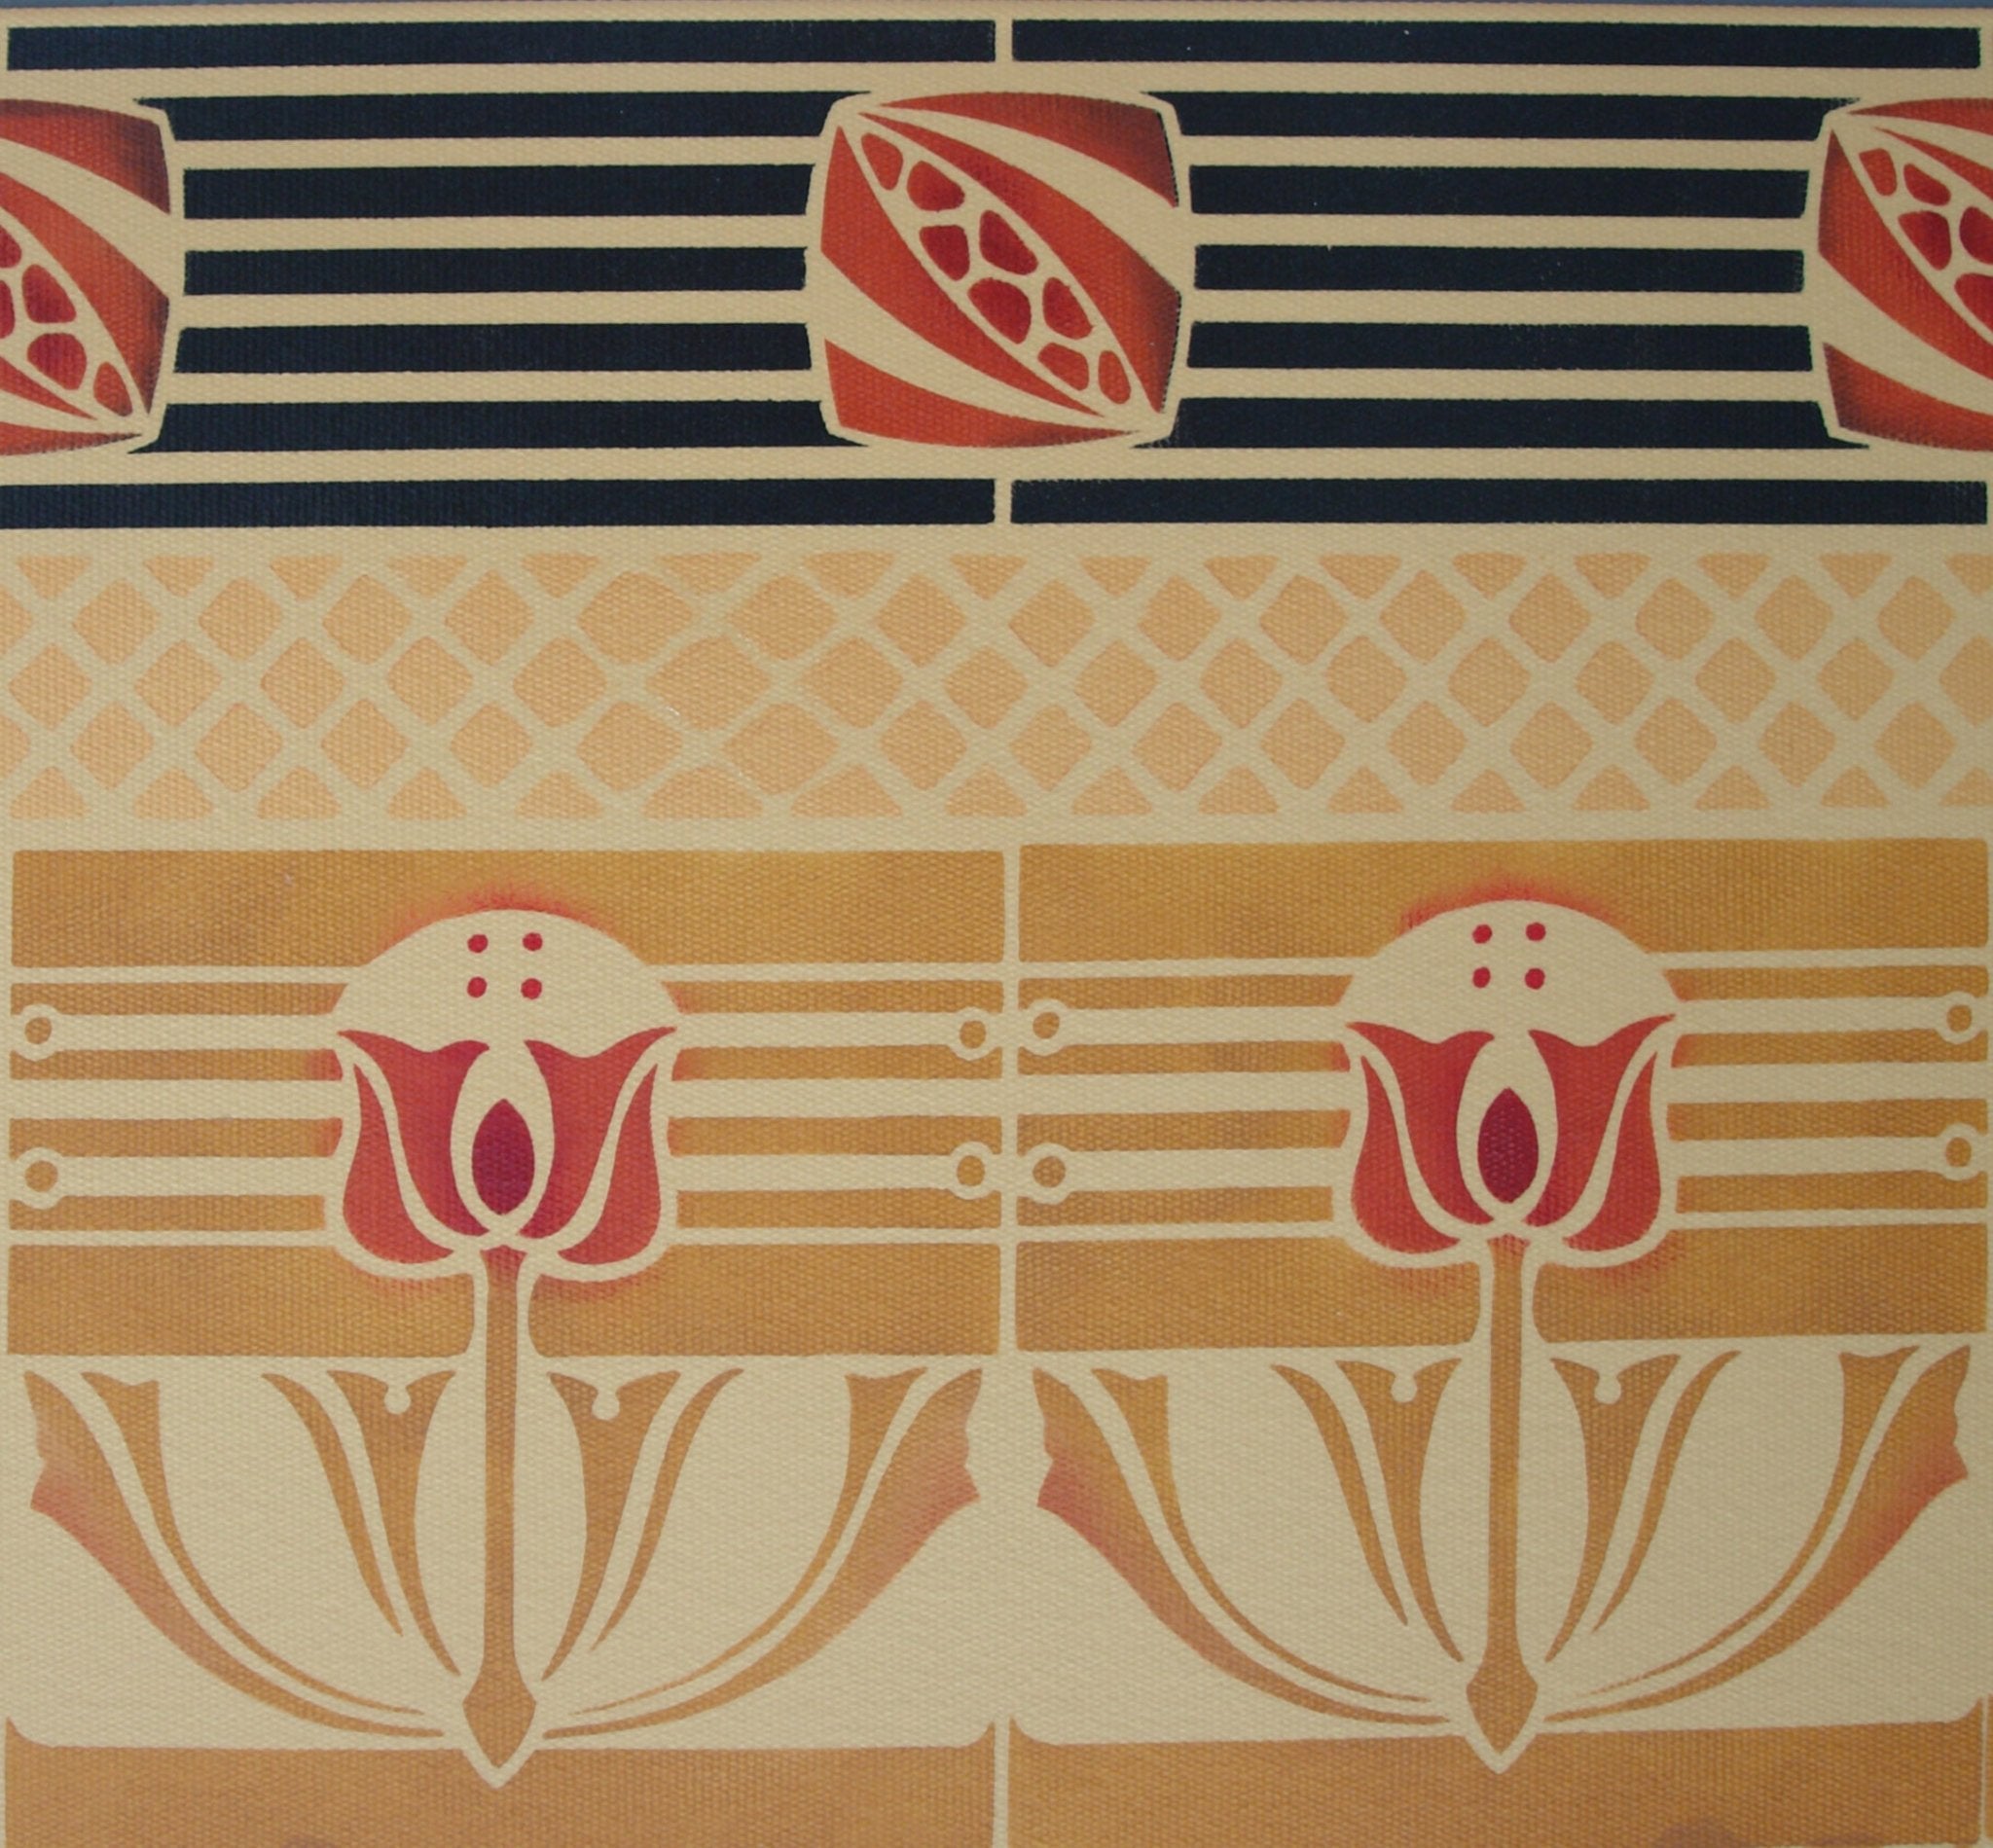 A close up of the border of Wunderlich Floorcloth #4.